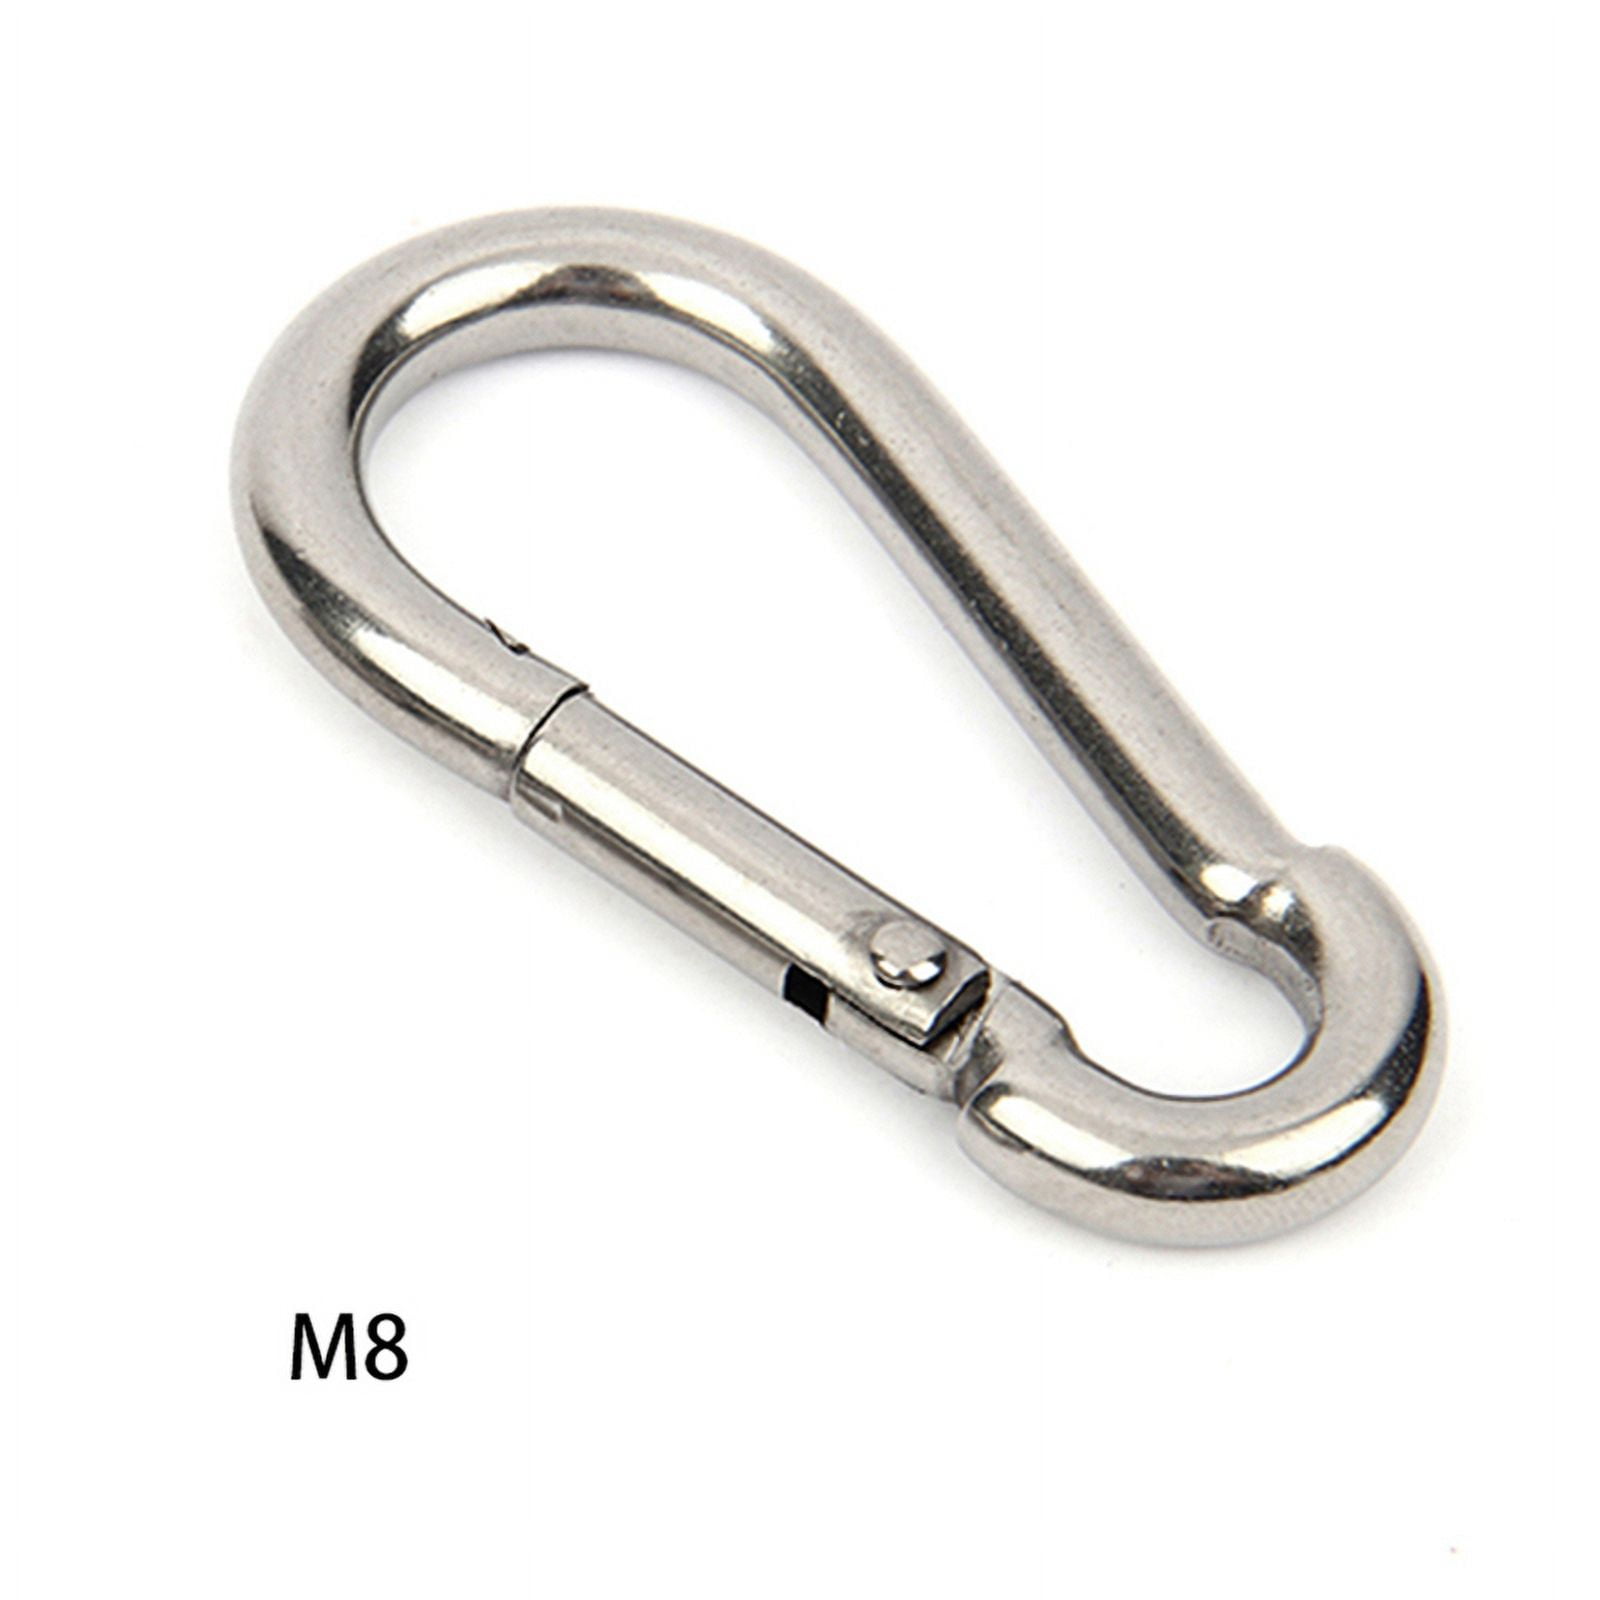 100/200/500Pcs Wholesale Lanyard Clip Spring Clasps Metal Gourd Buckles Dog  Chain Connector Key Chain Hooks Crafts Findings